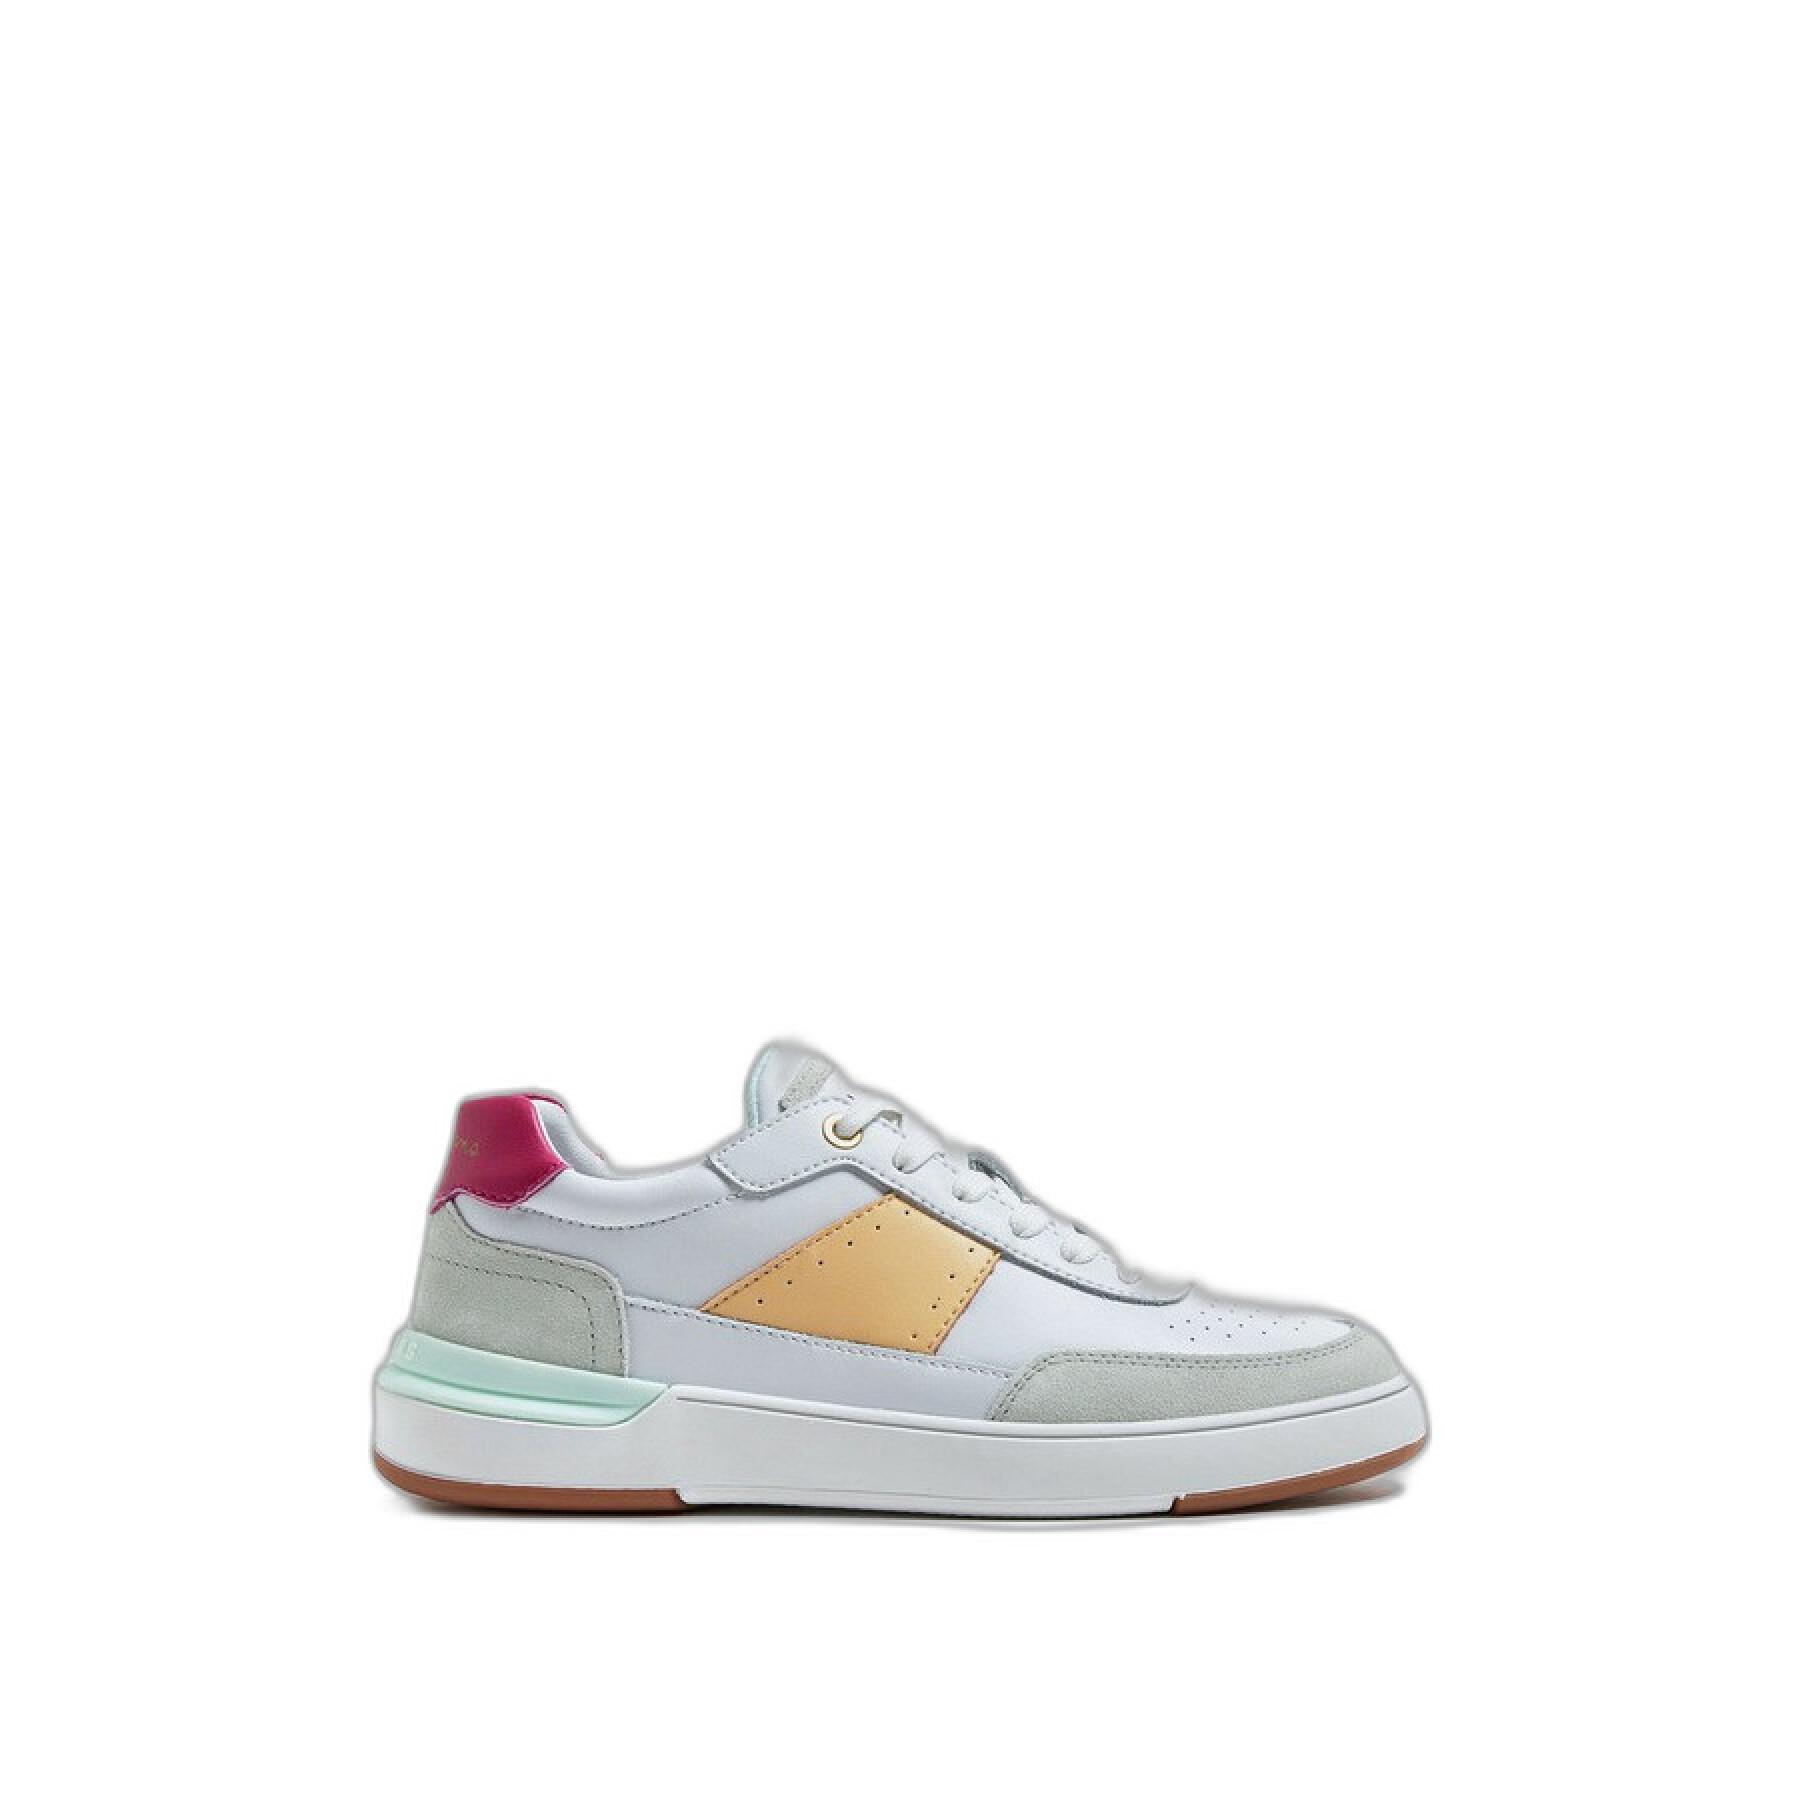 Women's sneakers Pepe Jeans Baxter Colors